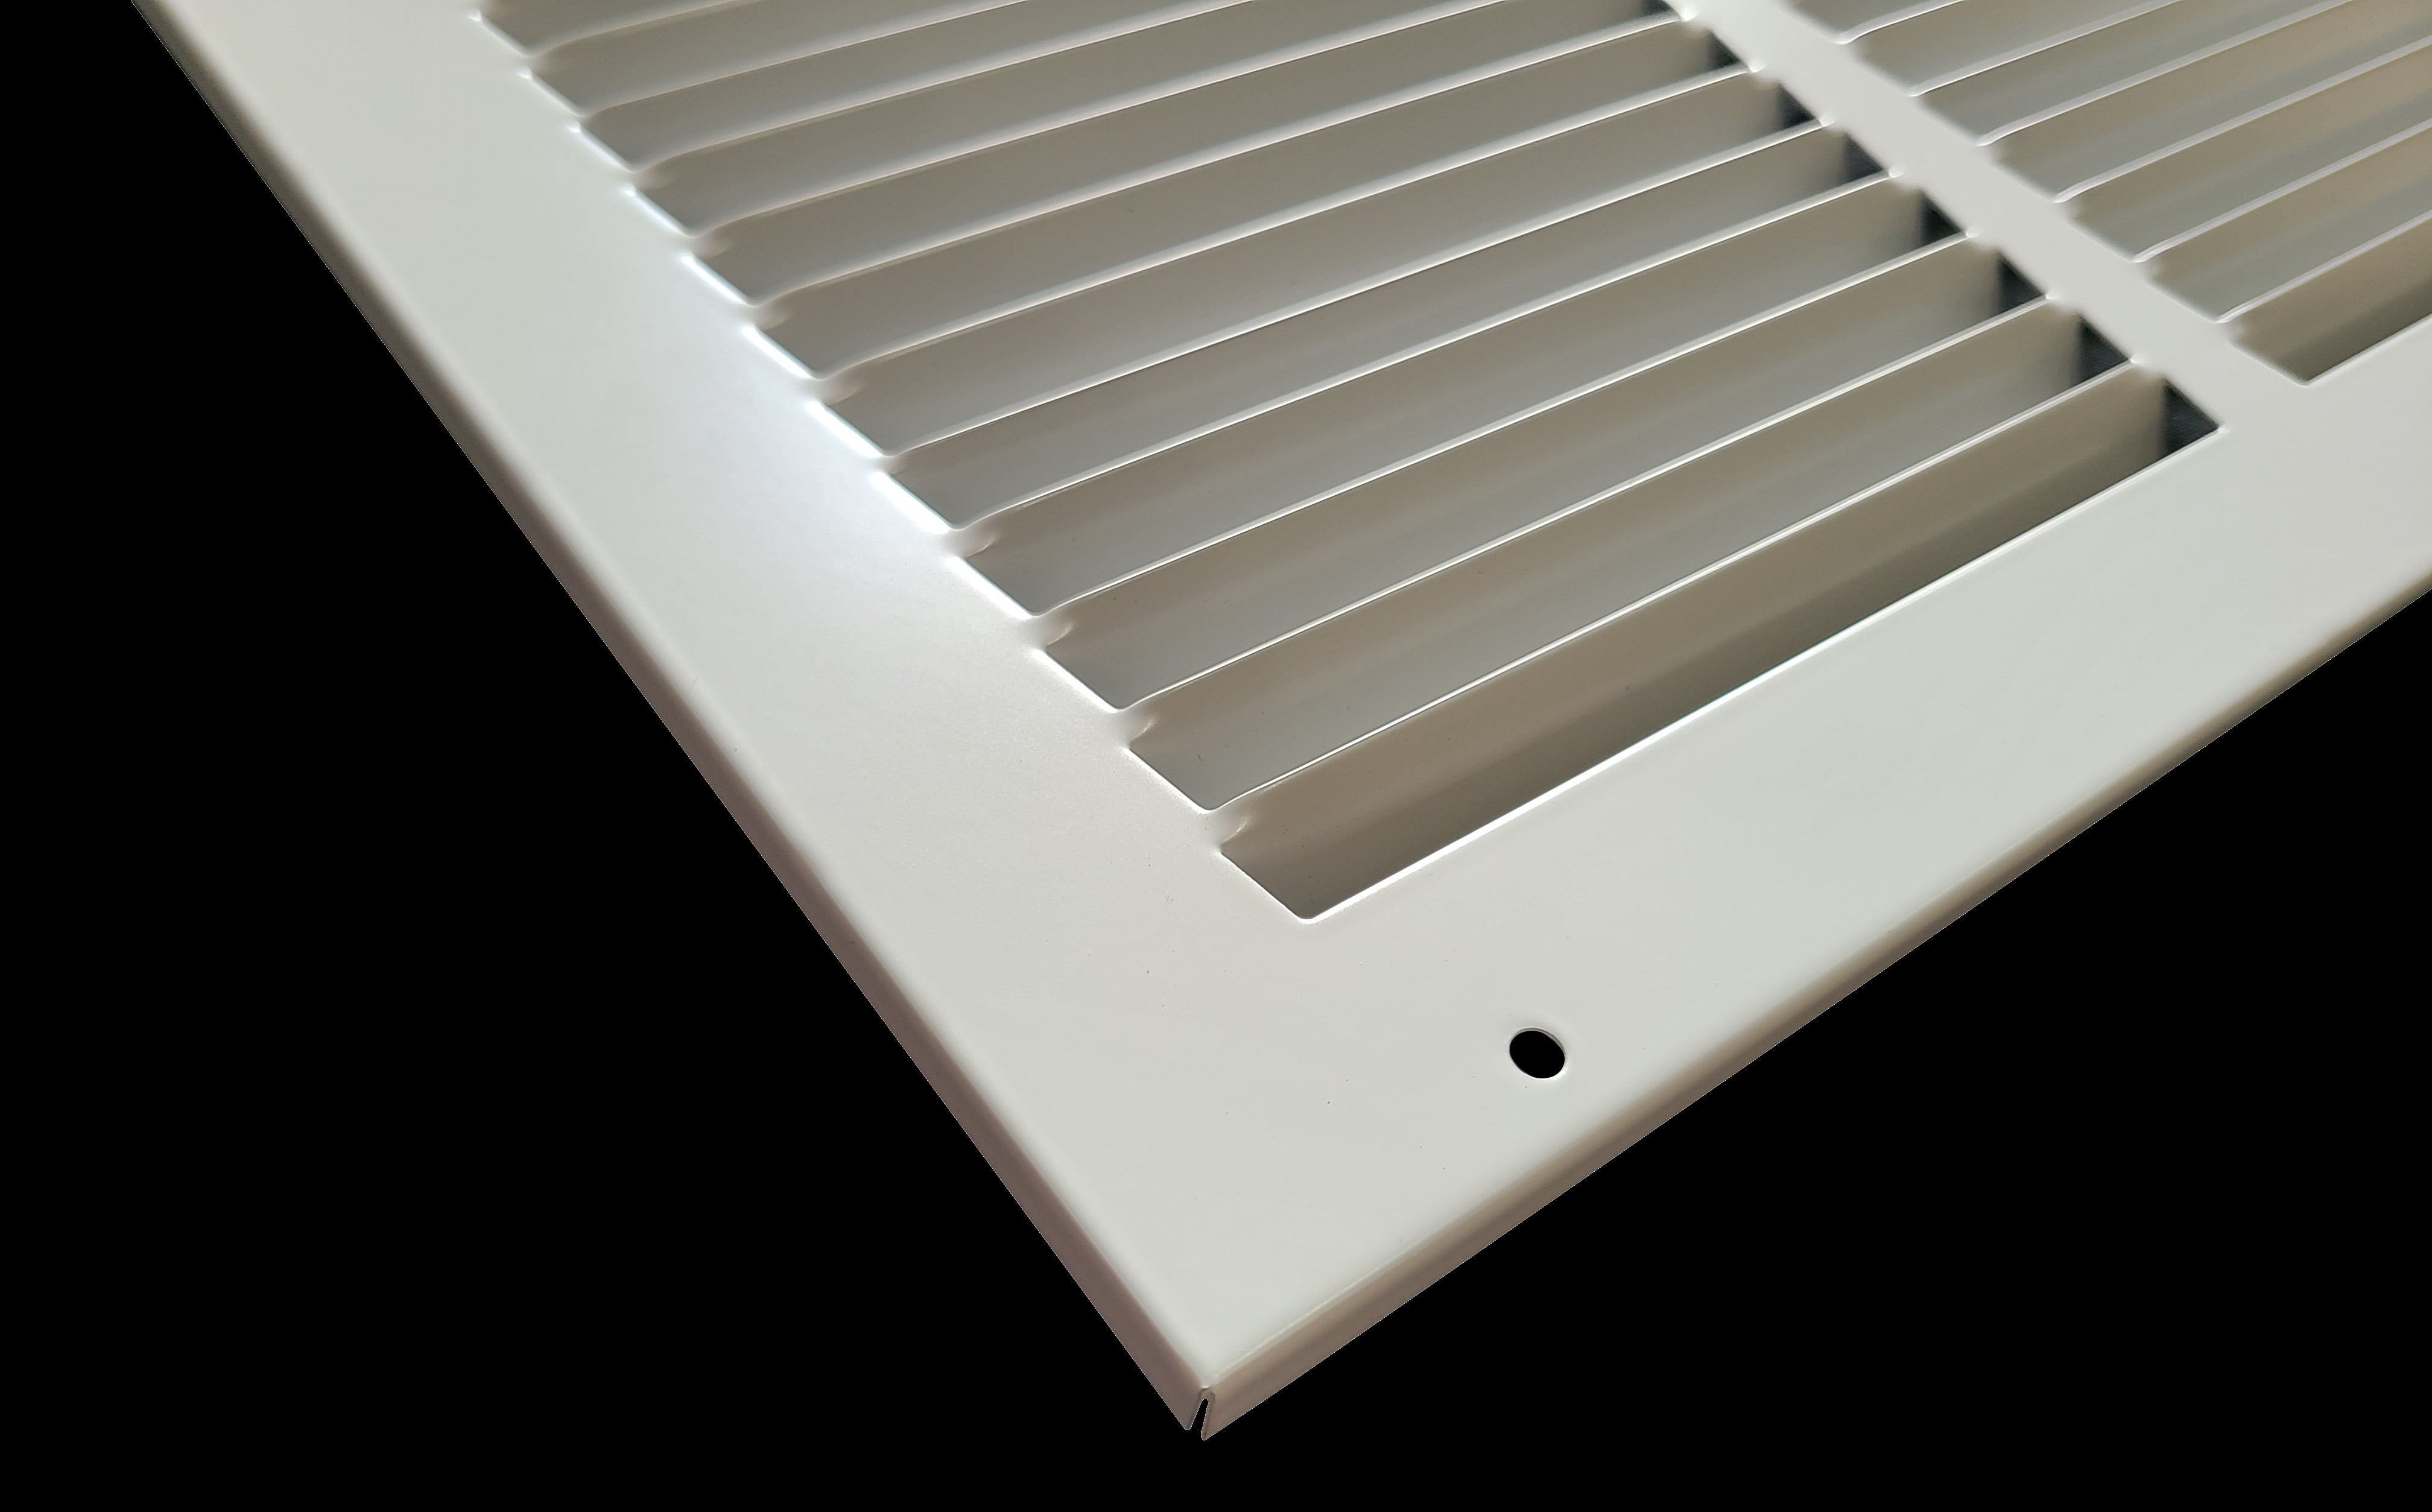 16" X 32" Duct Opening | Steel Return Air Grille for Sidewall and Ceiling | Outer Dimensions: 17.75"W X 33.75"H